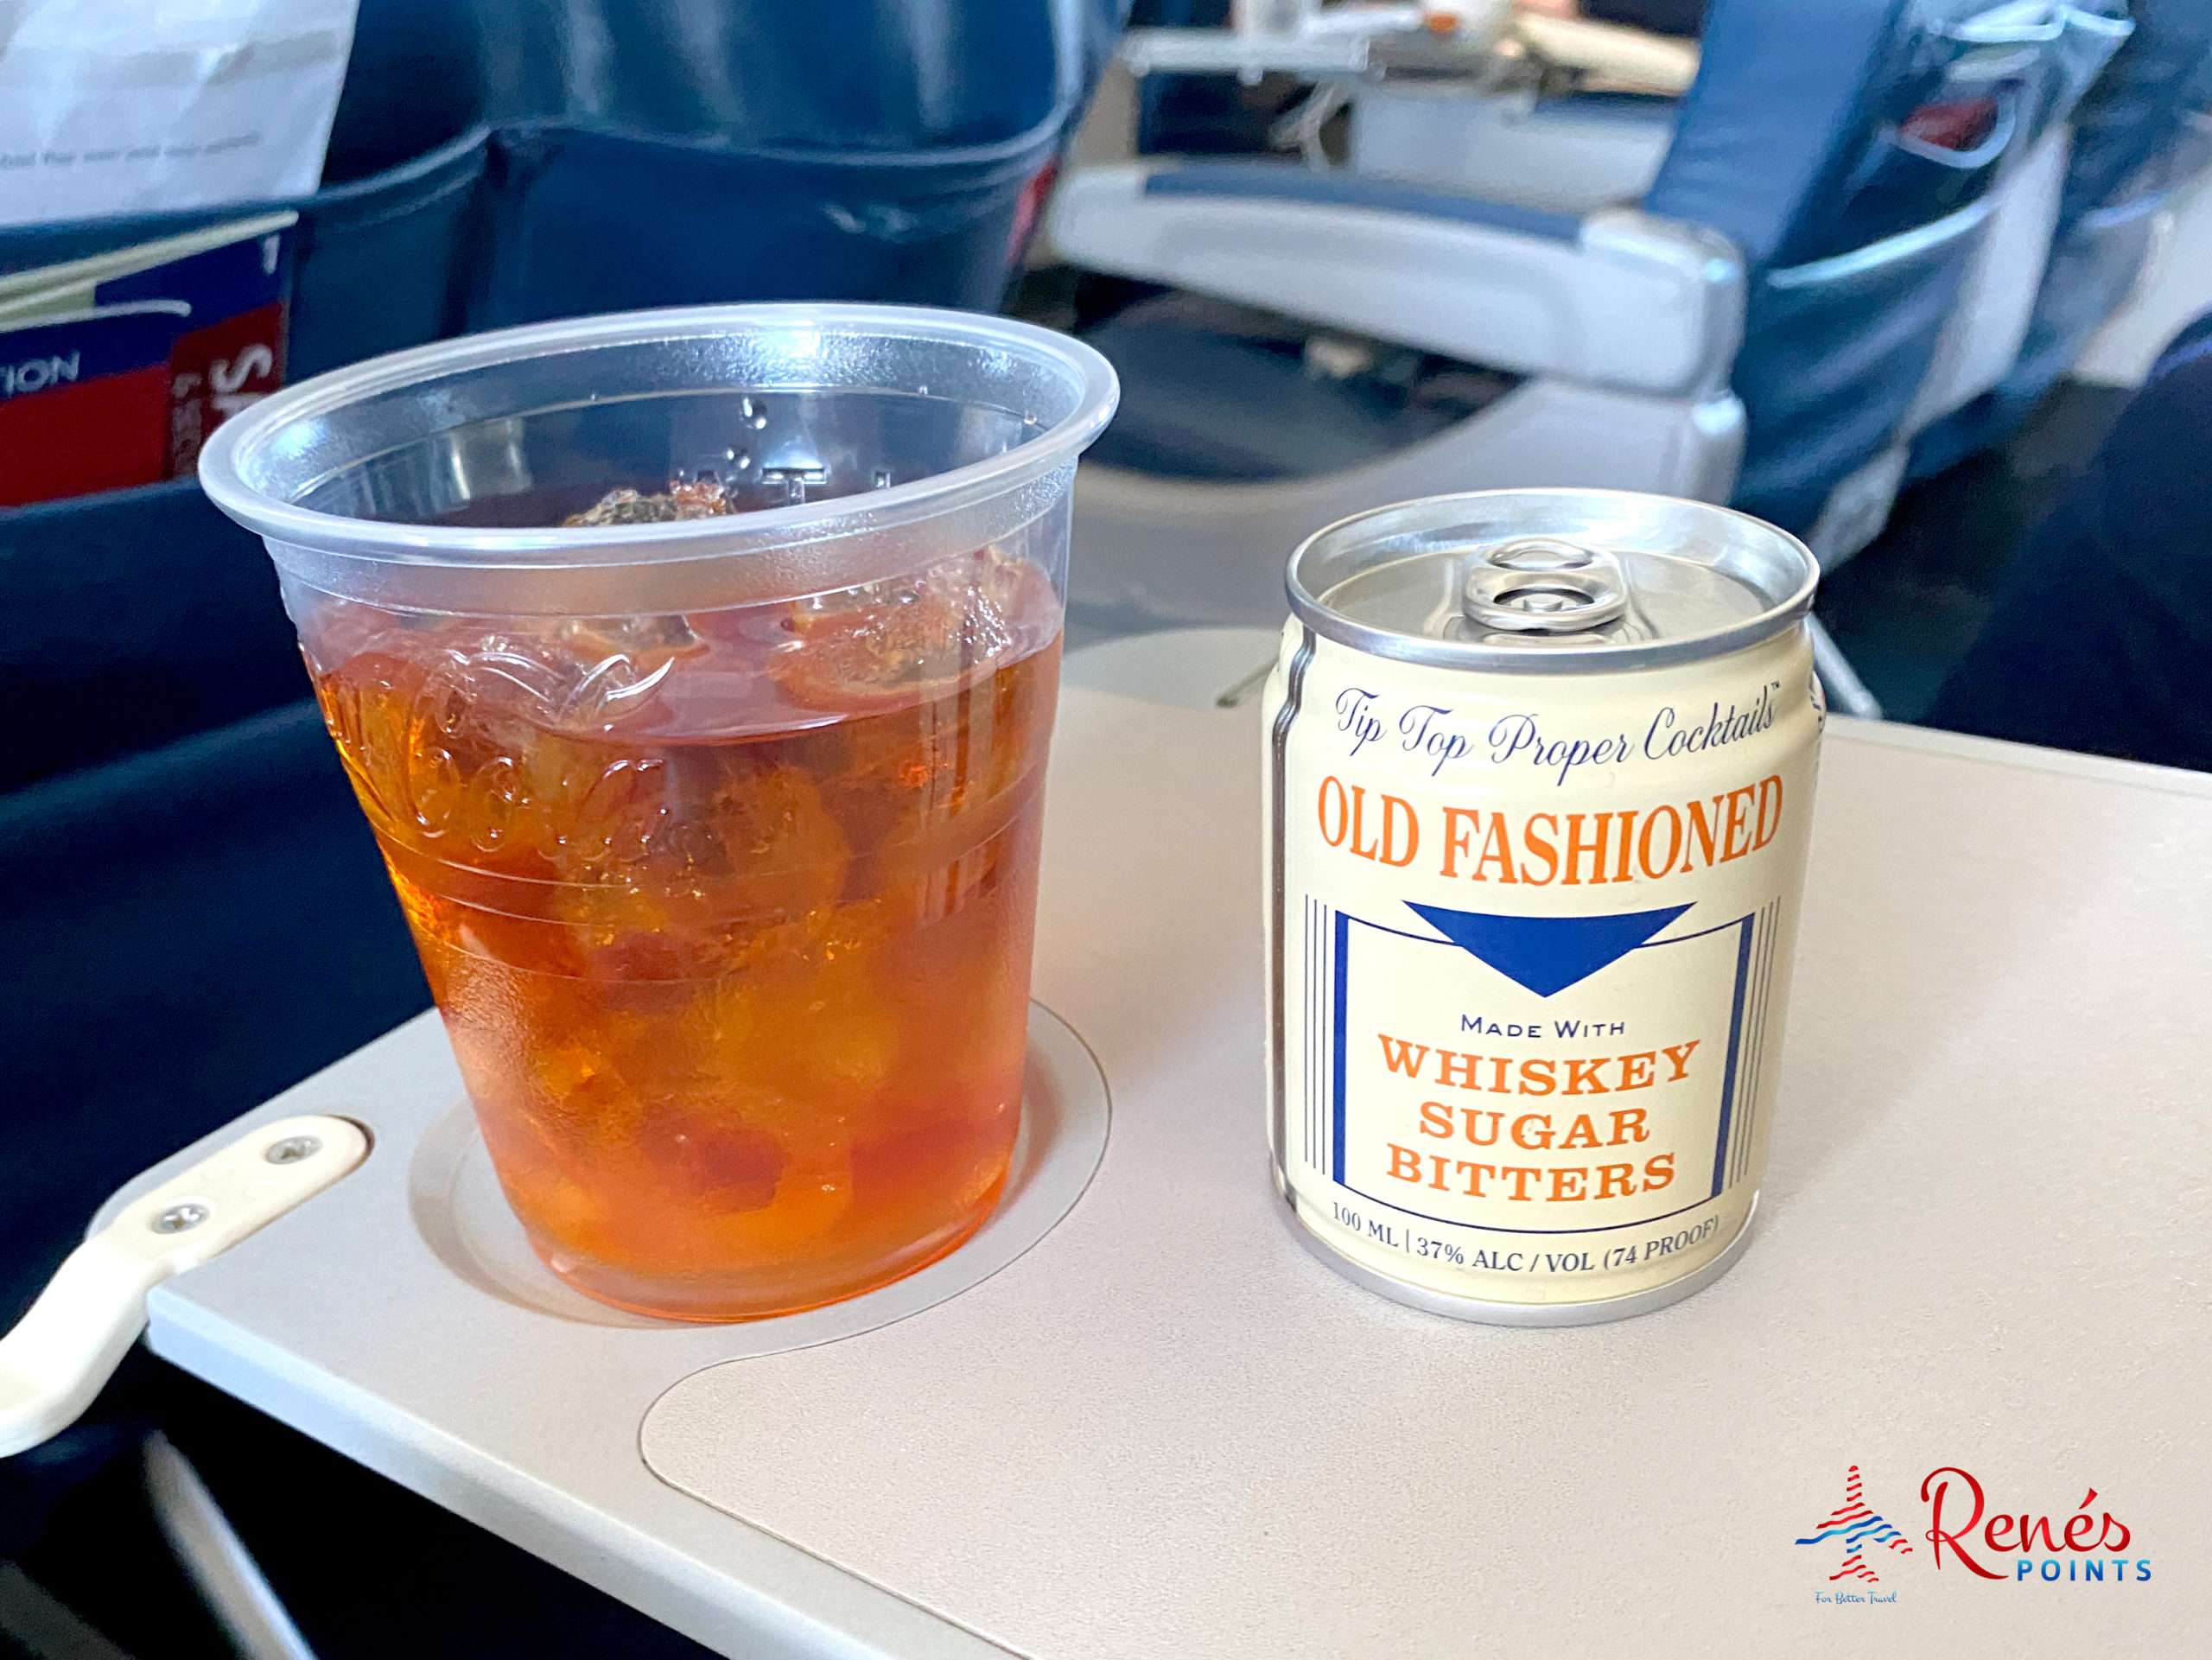 Tip Top Proper Cocktails' Old Fashioned served during a Delta Air Lines flight.